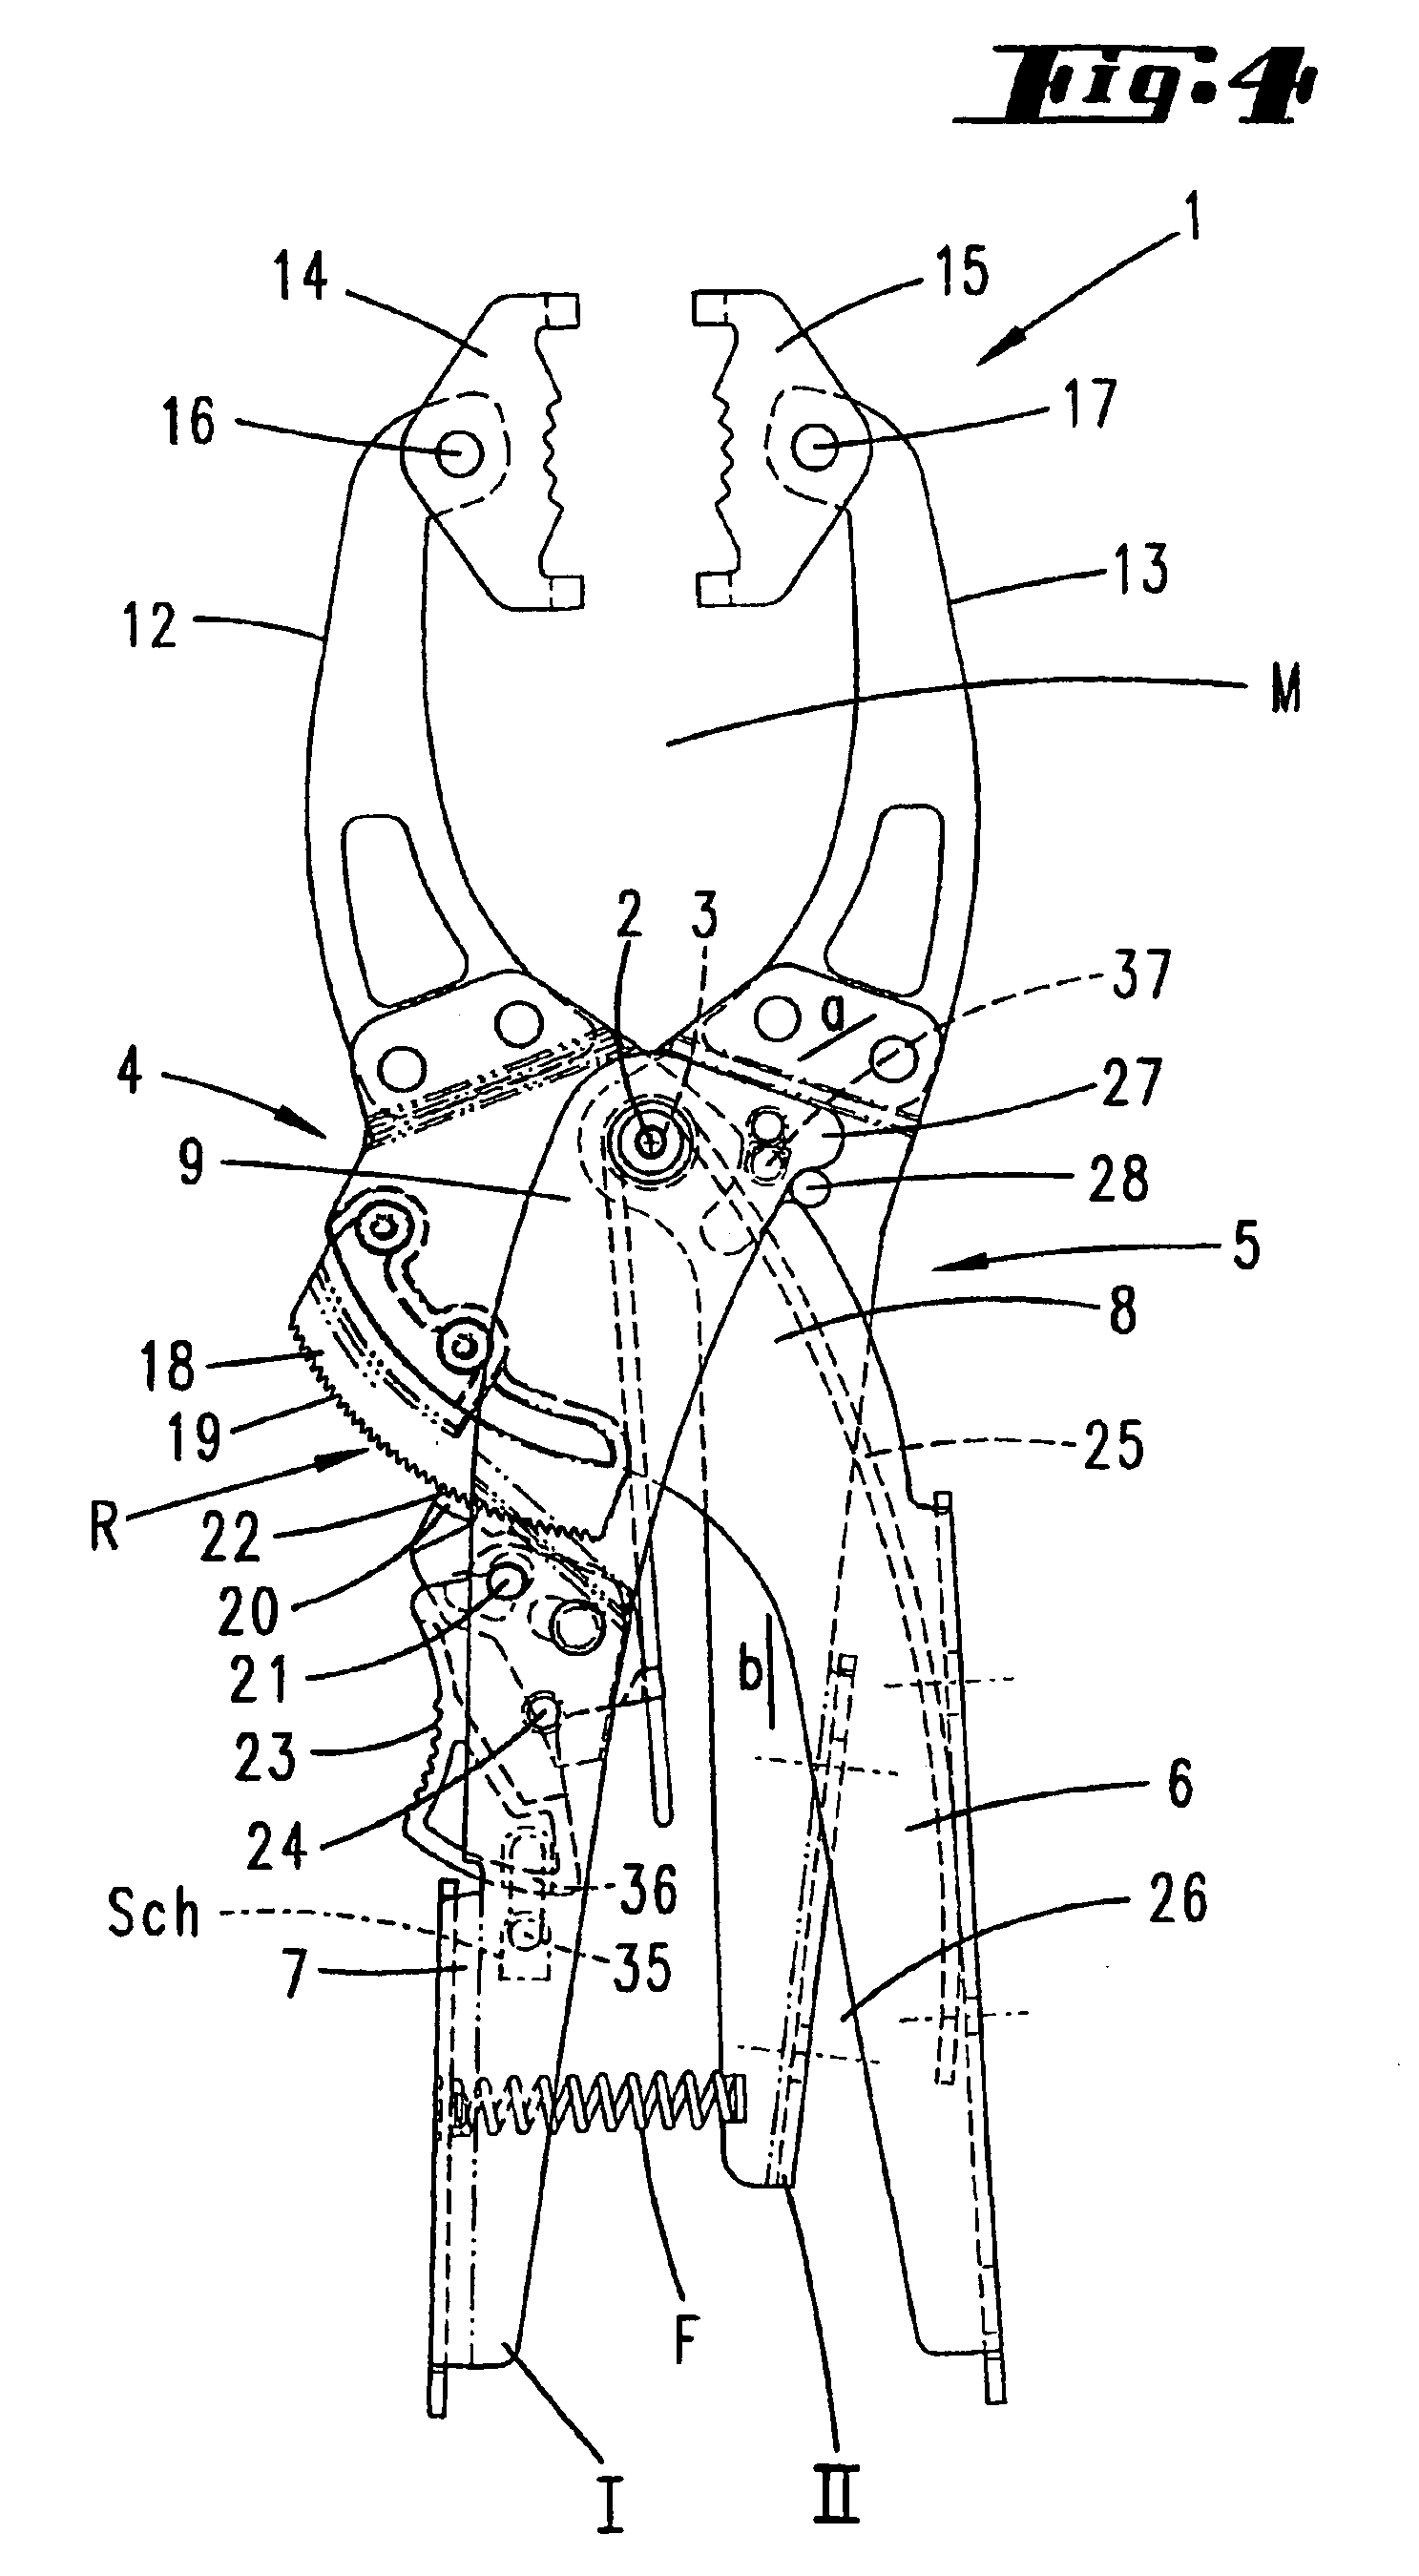 Clamping or expanding pliers